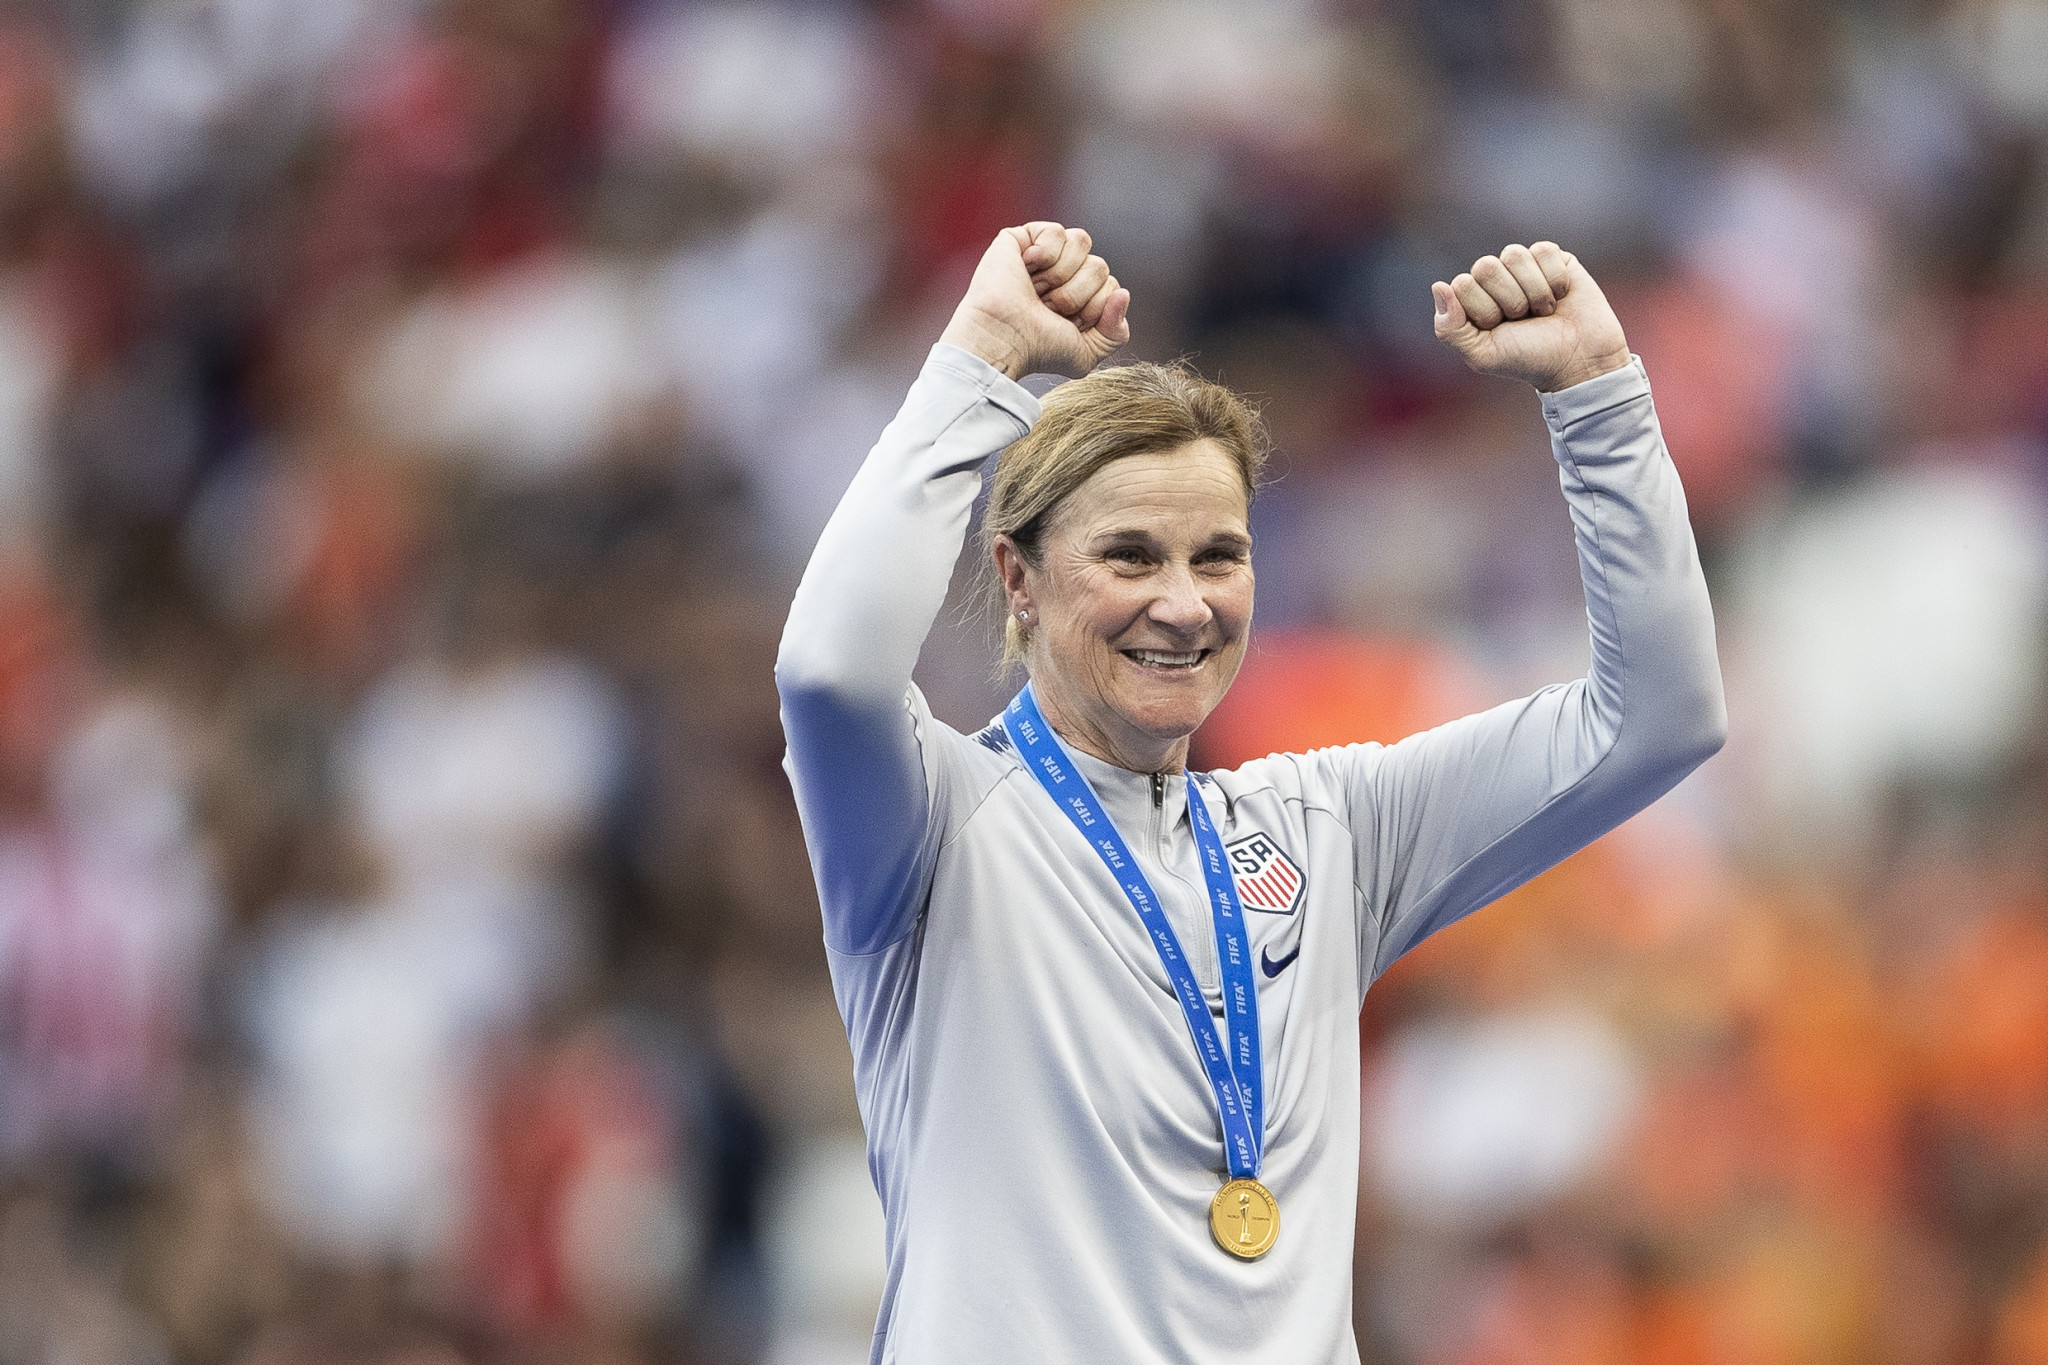 Jill Ellis led the United States to consecutive FIFA Women's World Cup victories in 2015 and 2019 as head coach ©Getty Images